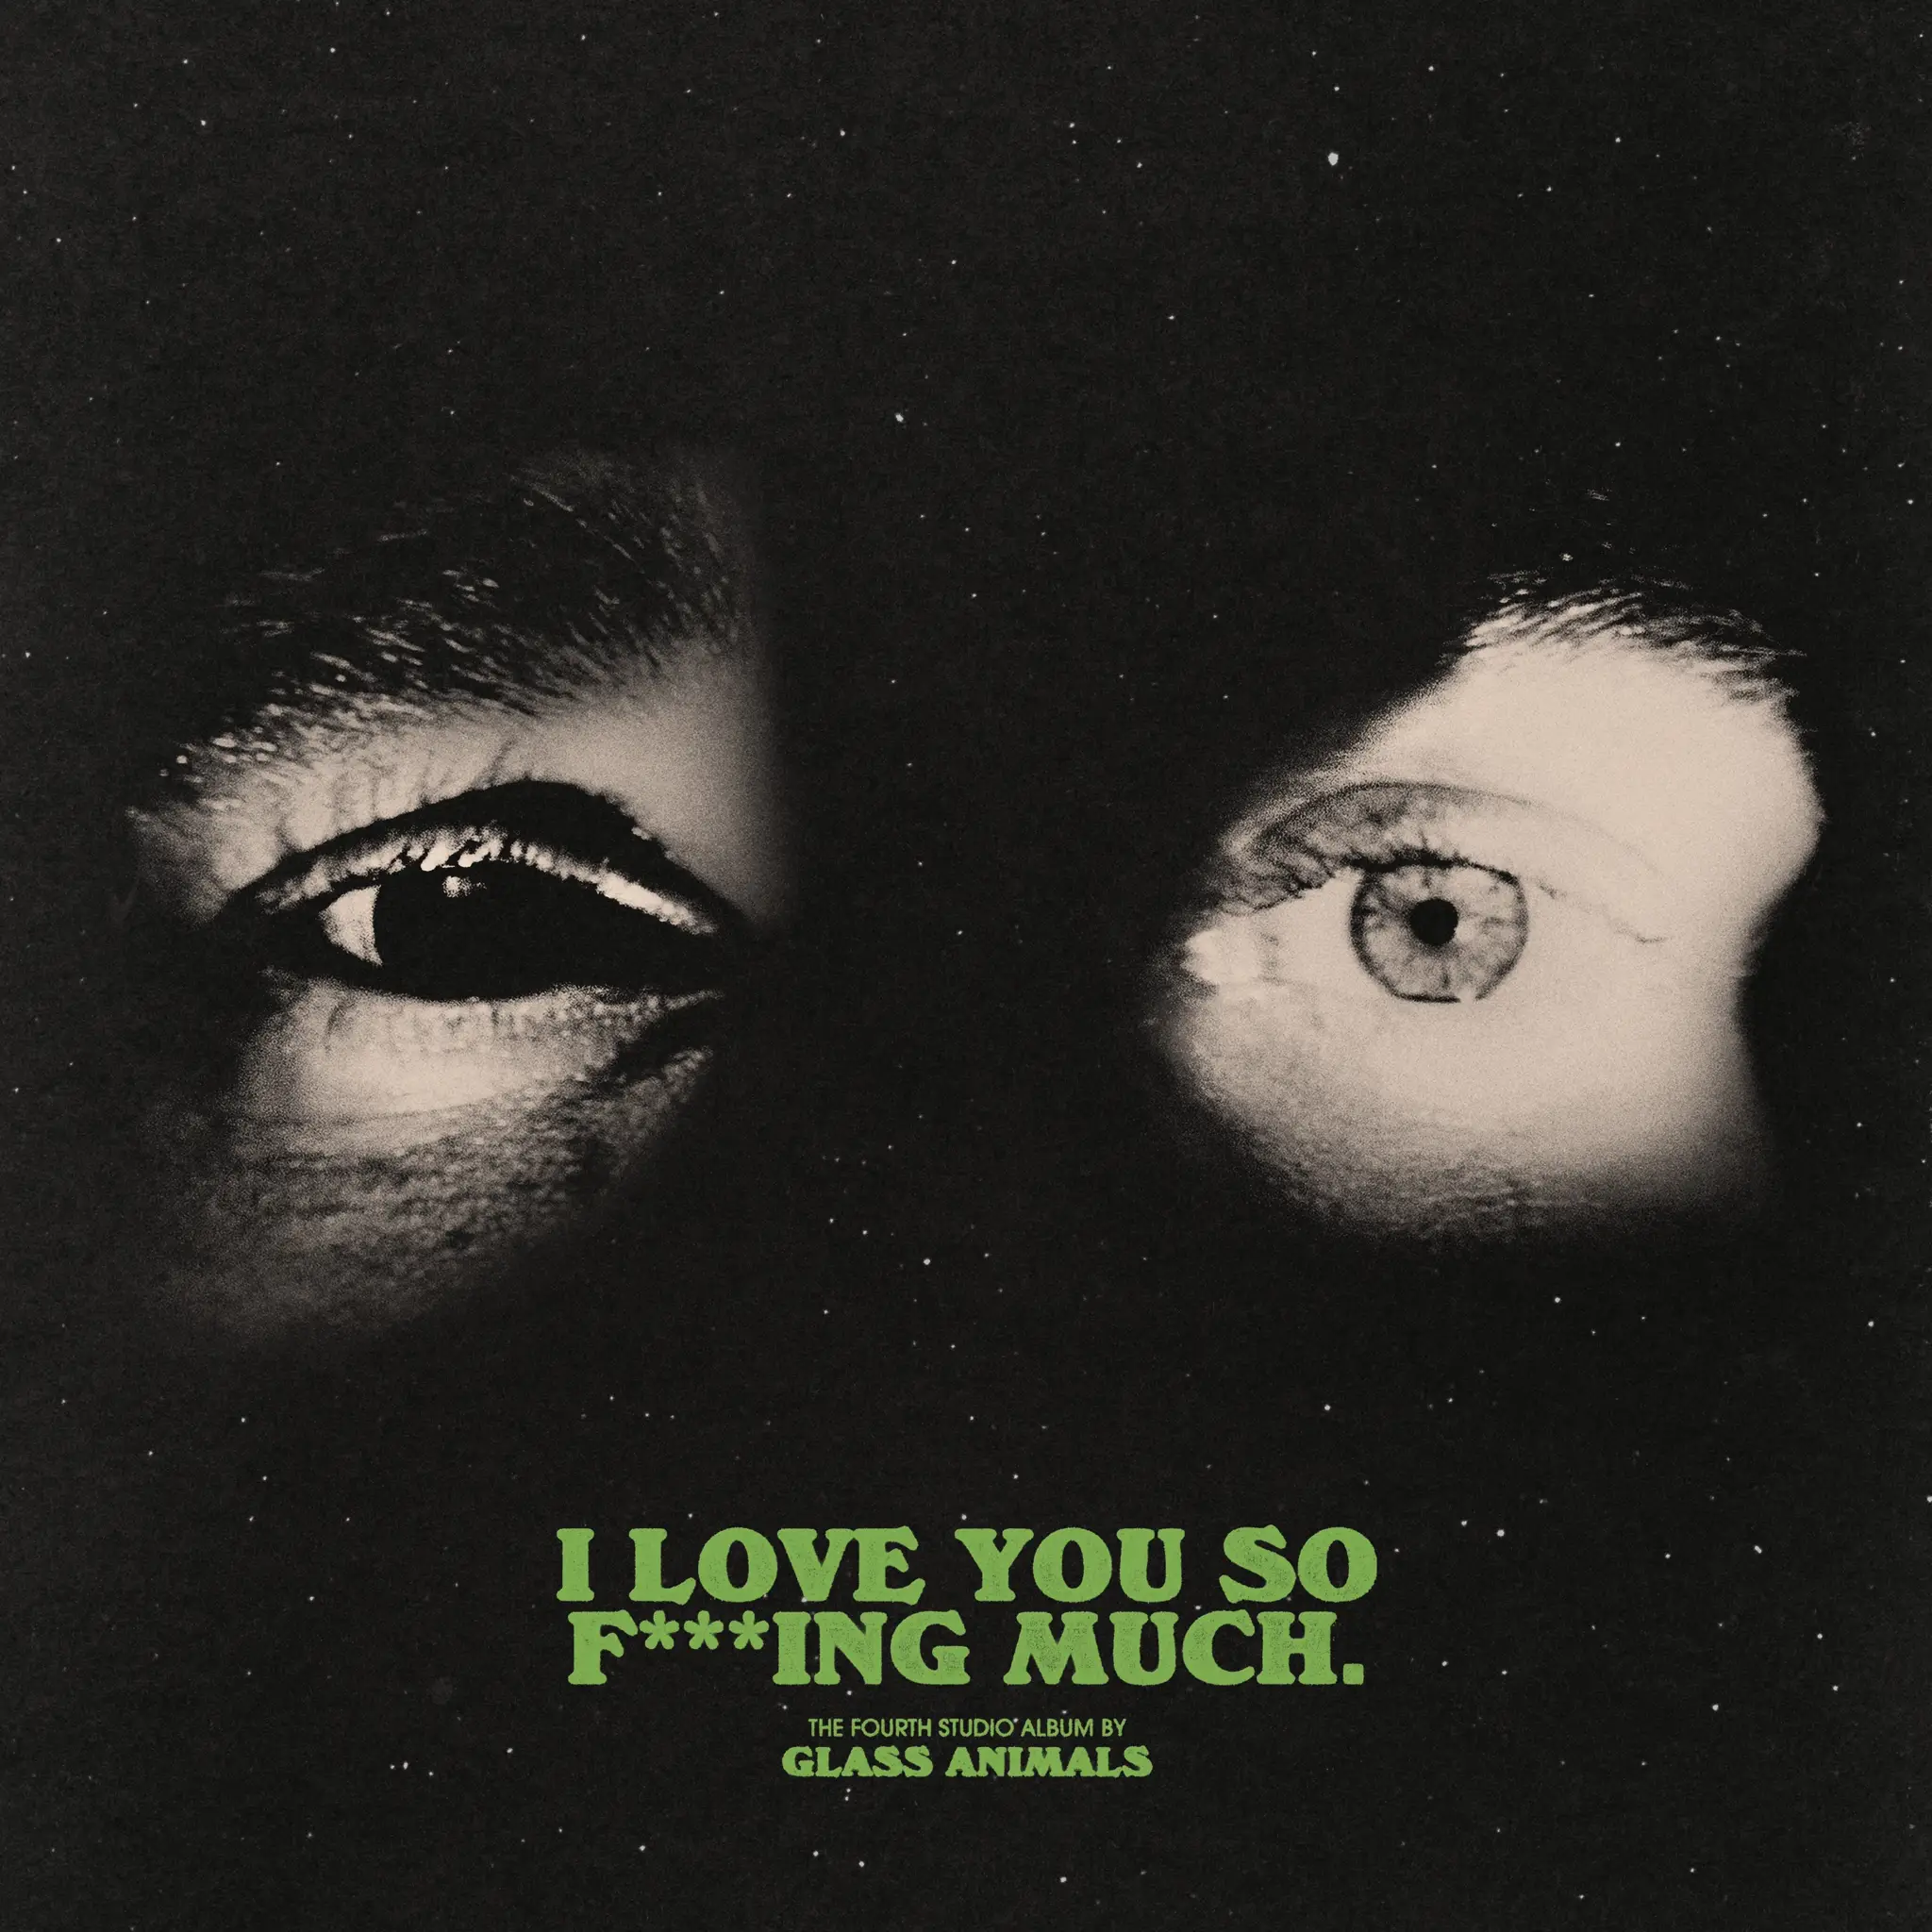 Buy I Love You So F***ing Much. via Rough Trade